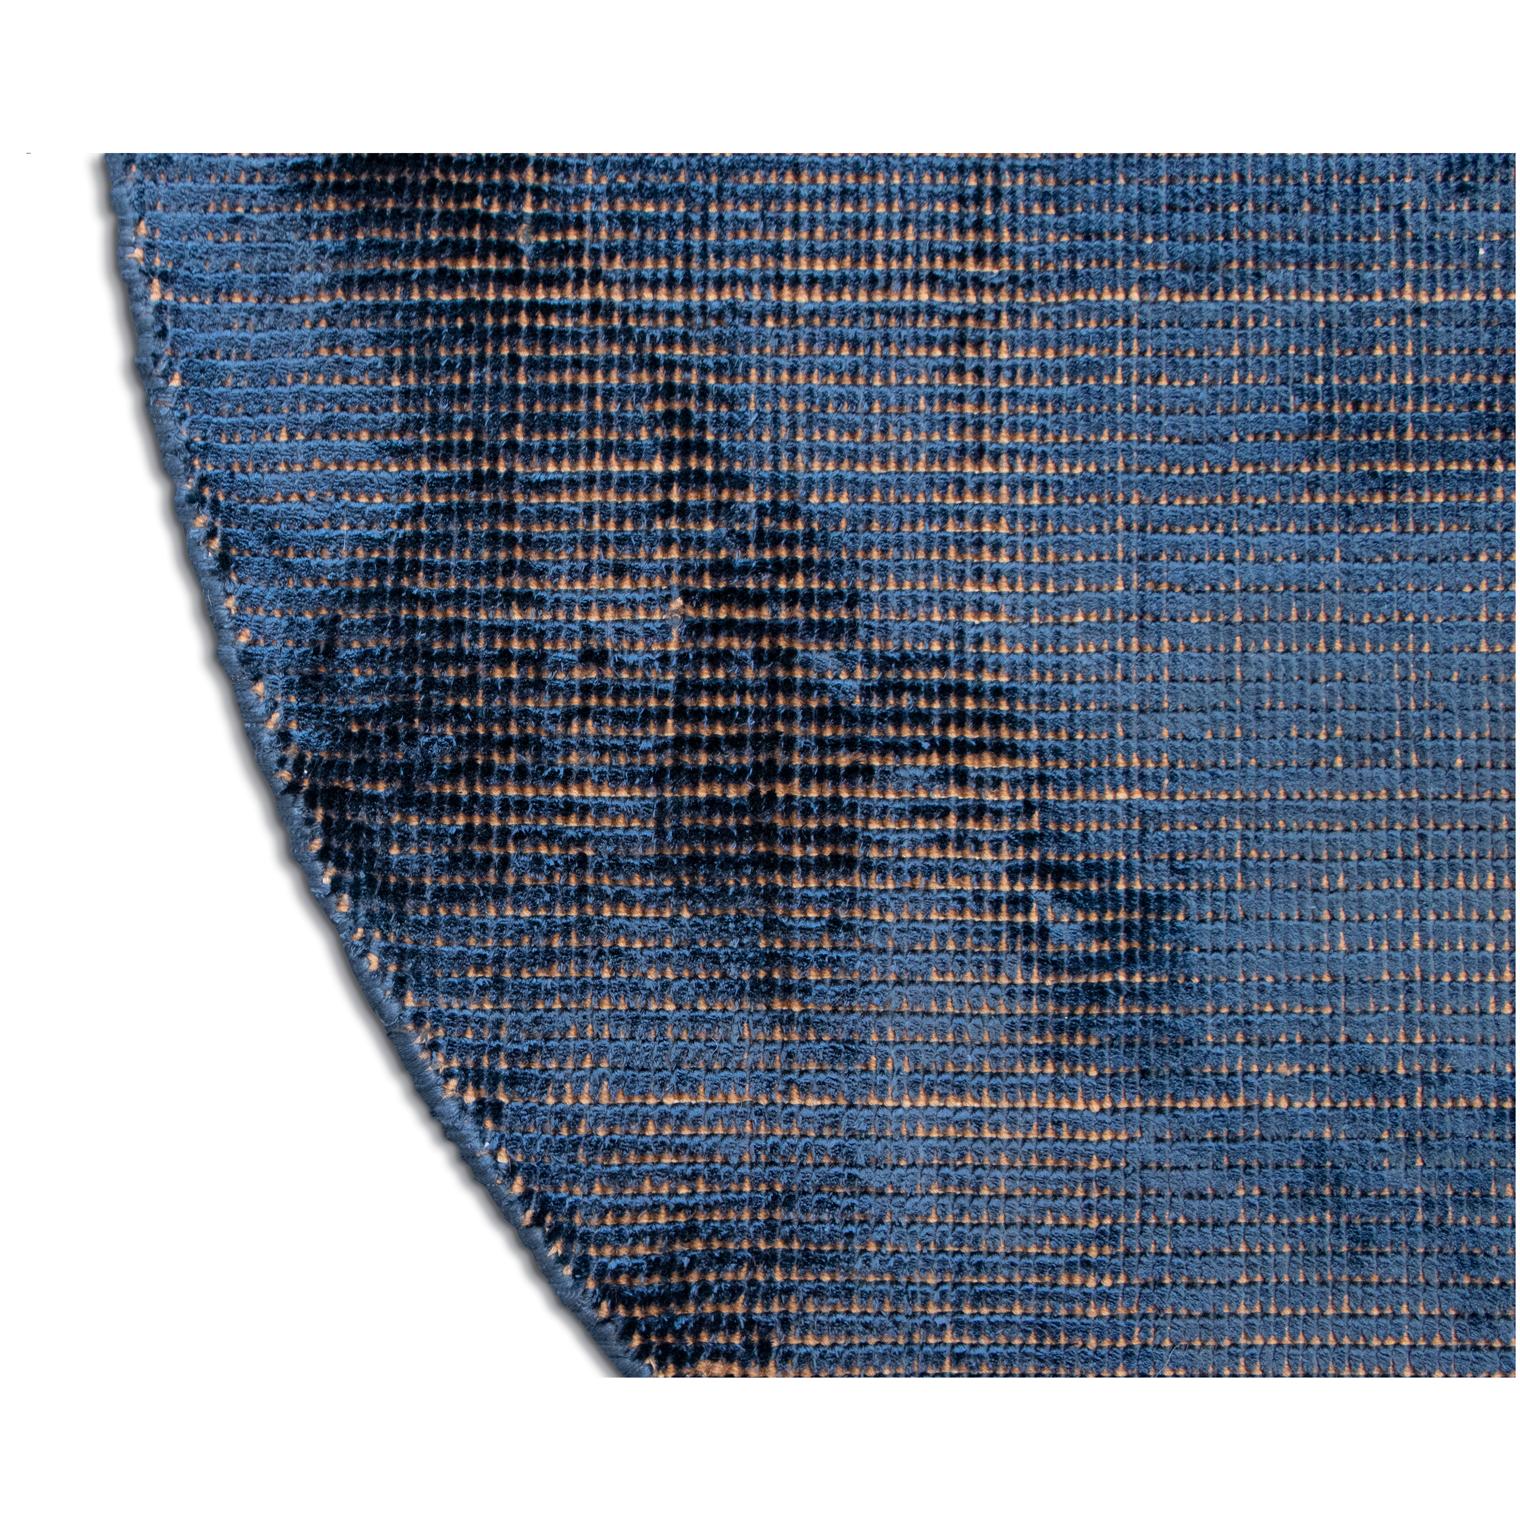 Contemporary Natural Shiny Blue Pure Silk Rug by Deanna Comelllini 180x190 cm (Indisch) im Angebot